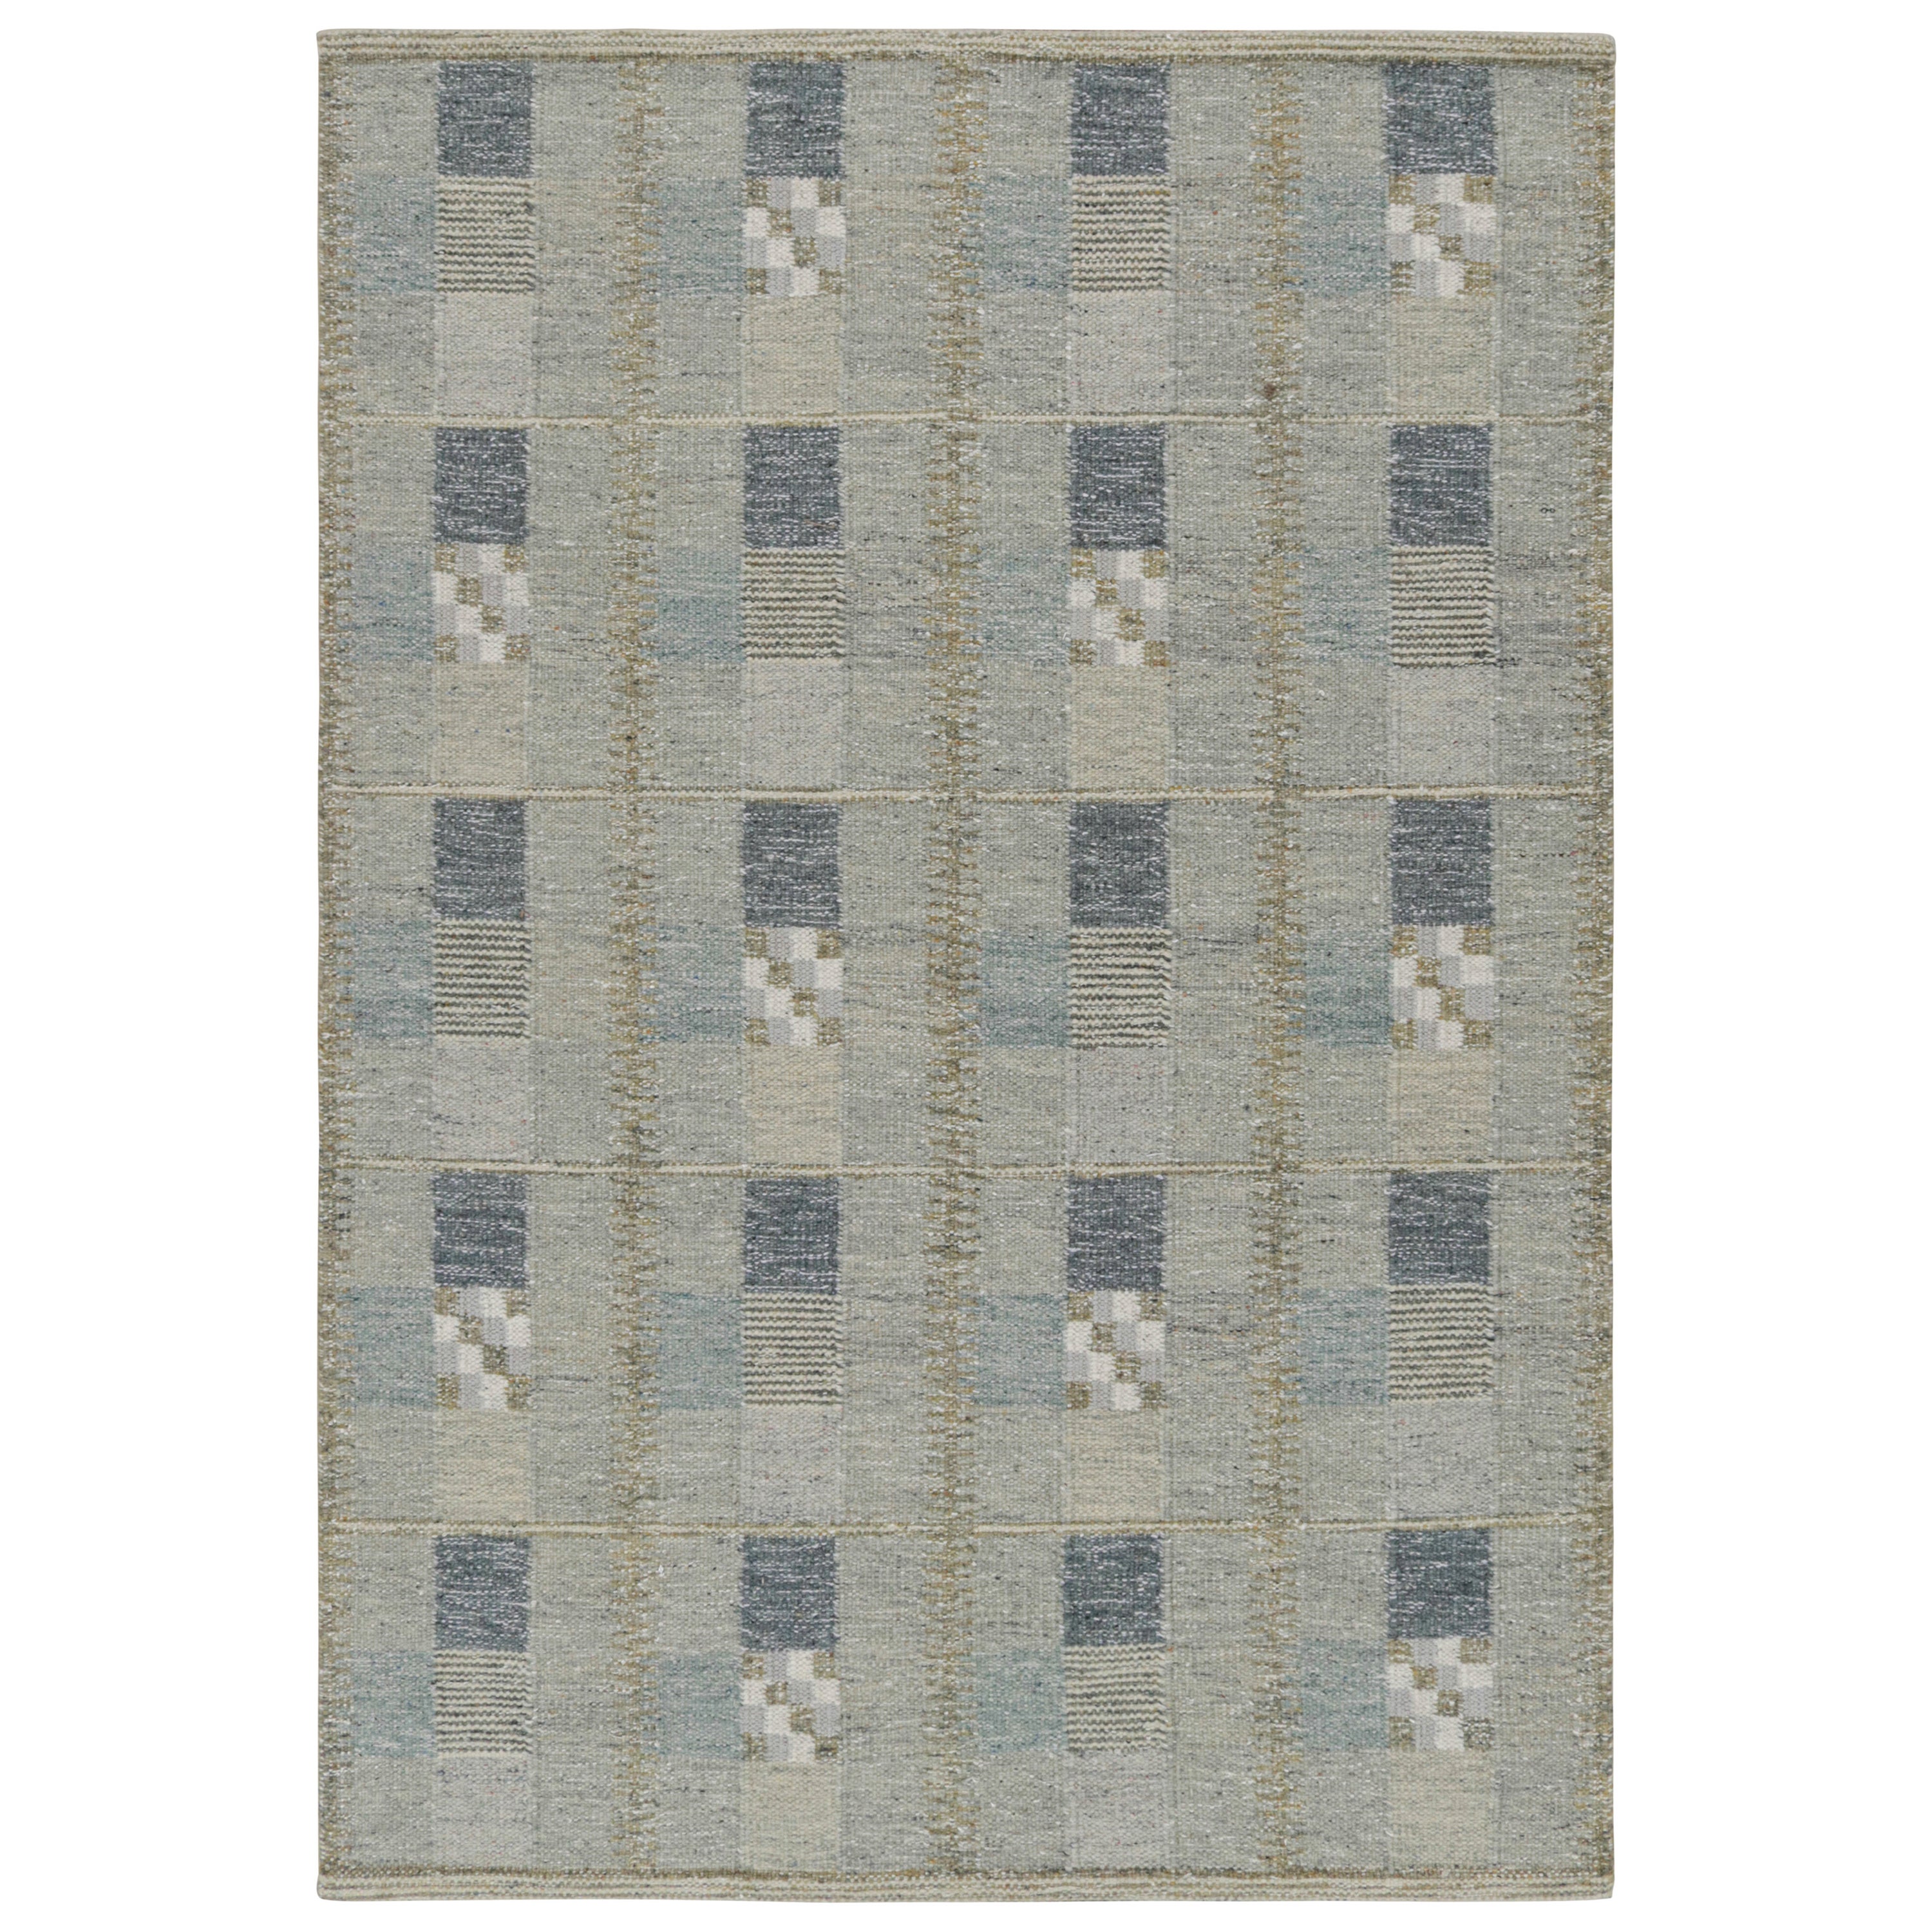 Rug & Kilim’s Scandinavian Kilim Rug with Gray and Blue Geometric Patterns For Sale